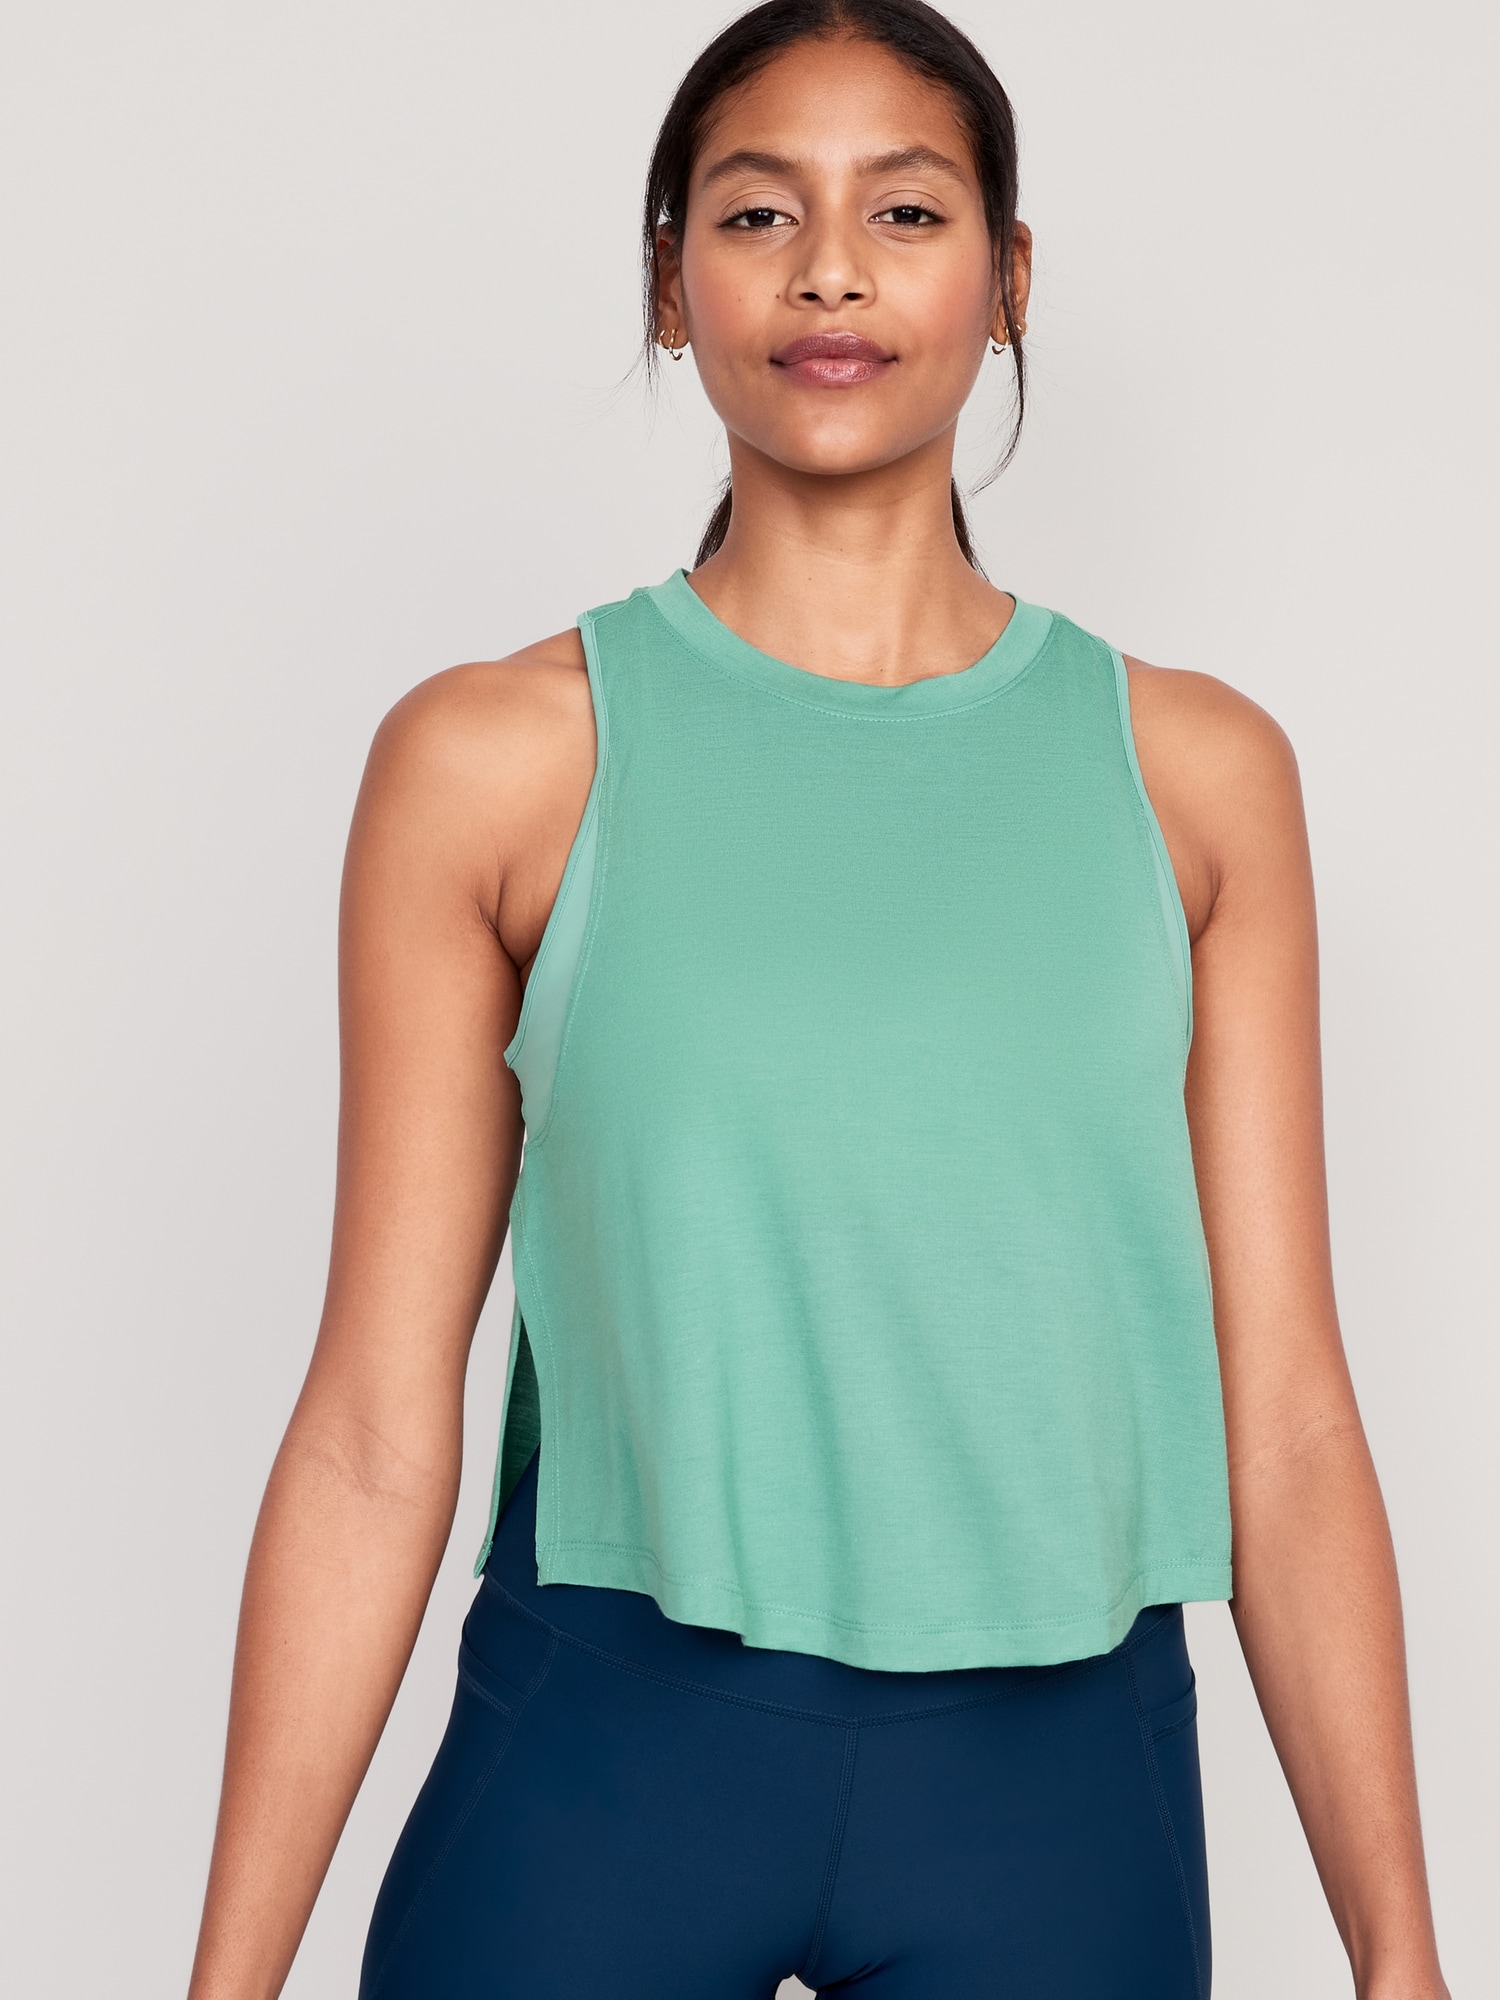 Old Navy Sleeveless UltraLite All-Day Performance Cropped Top for Women green. 1